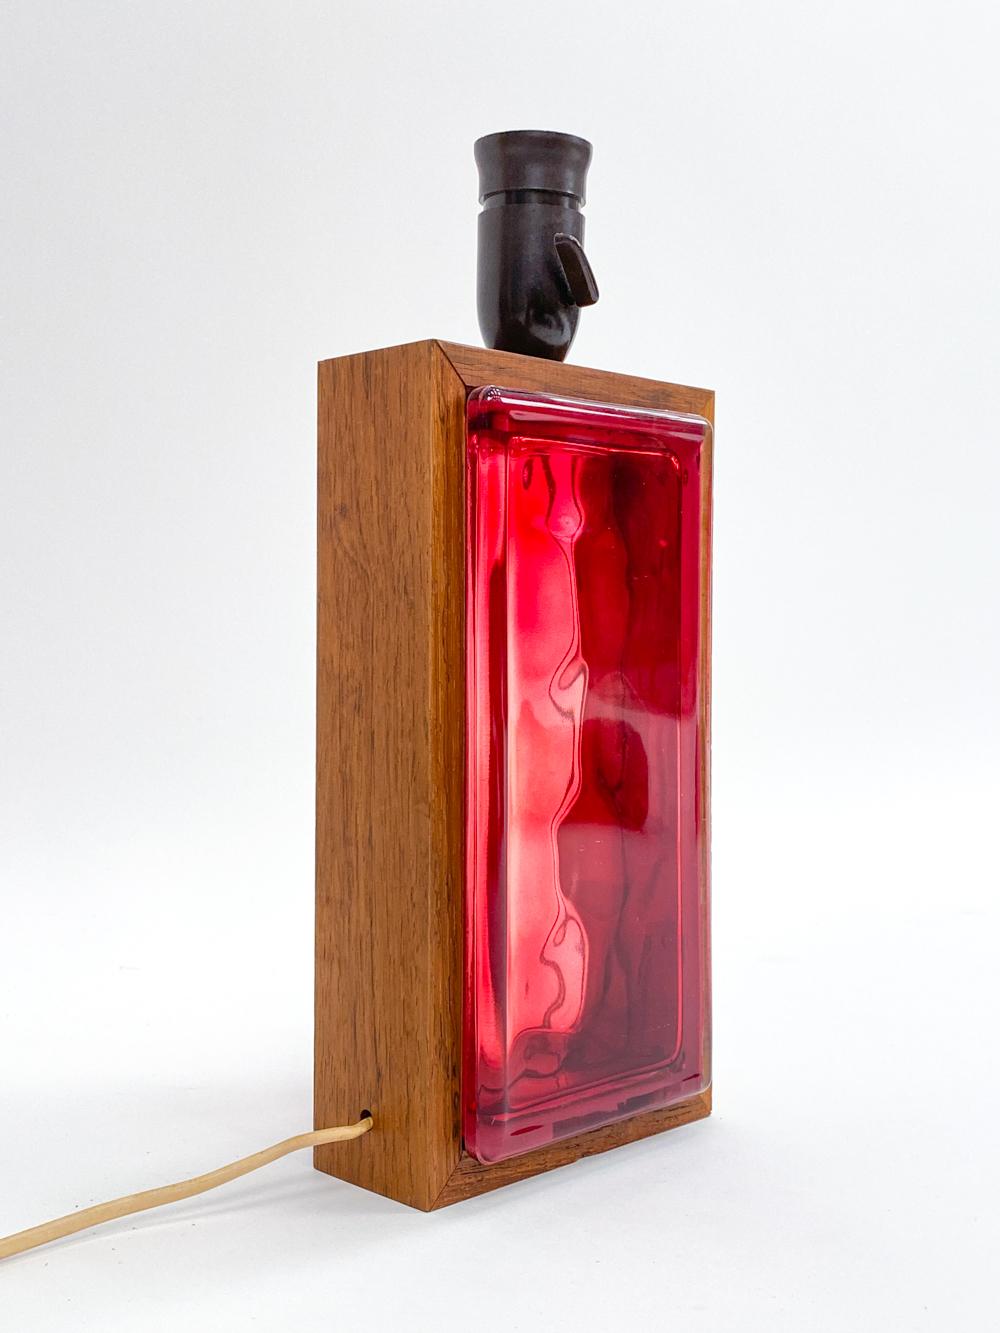 20th Century Swedish Red Glass Brick & Rosewood Table Lamp, c. 1960's For Sale